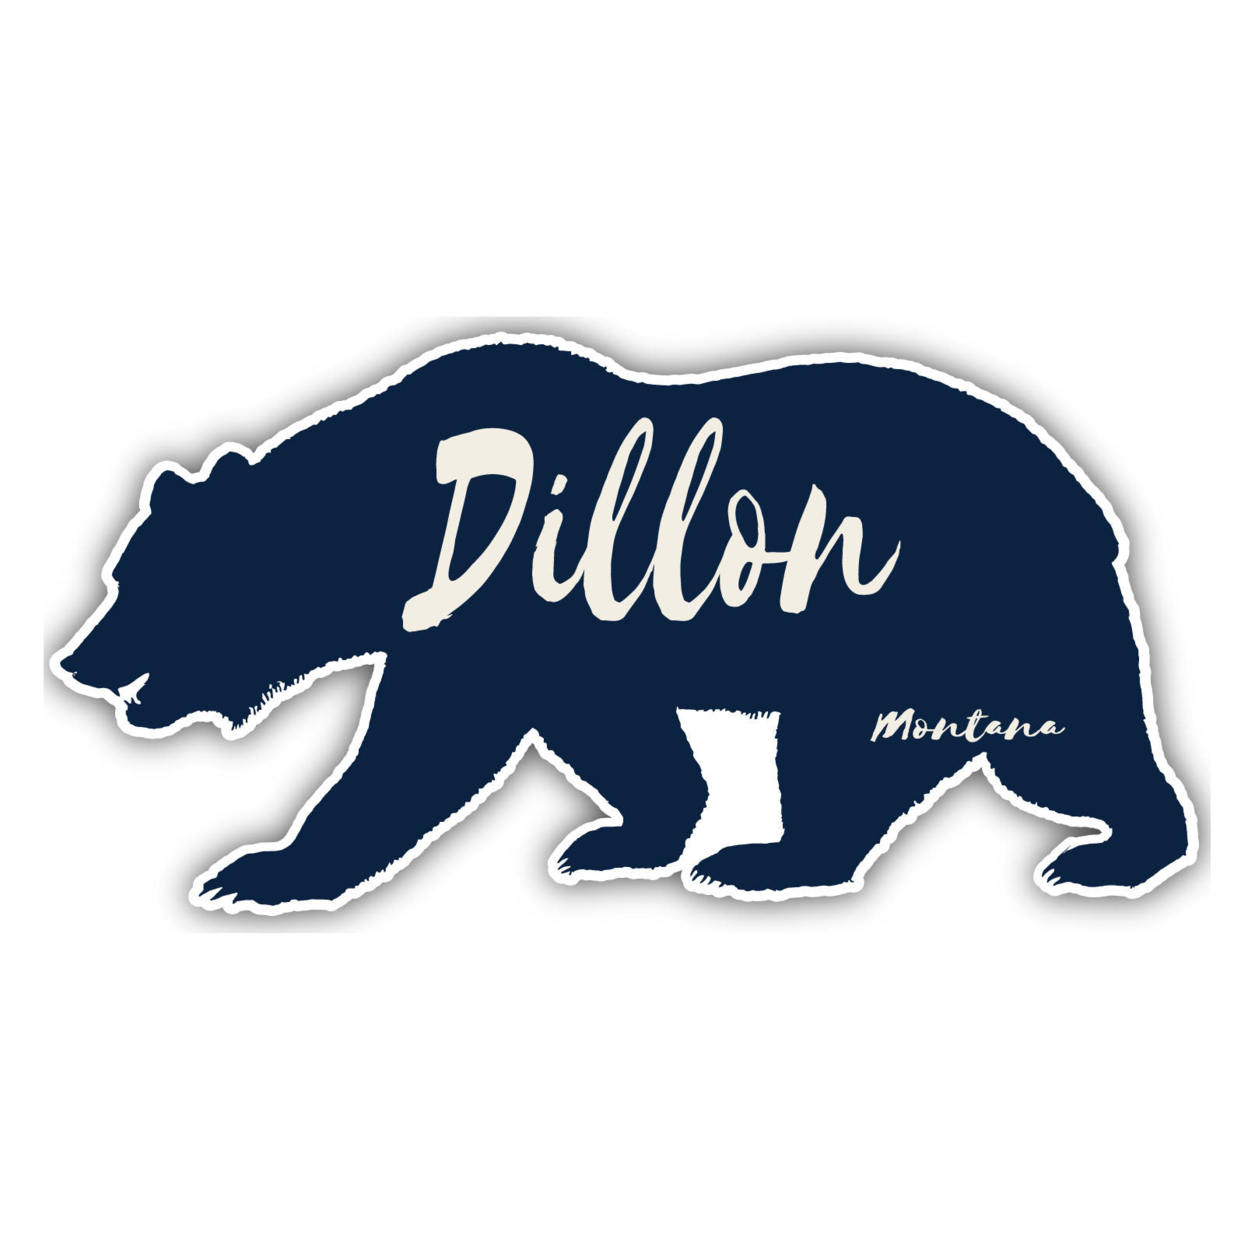 Dillon Montana Souvenir Decorative Stickers (Choose Theme And Size) - 4-Pack, 2-Inch, Camp Life